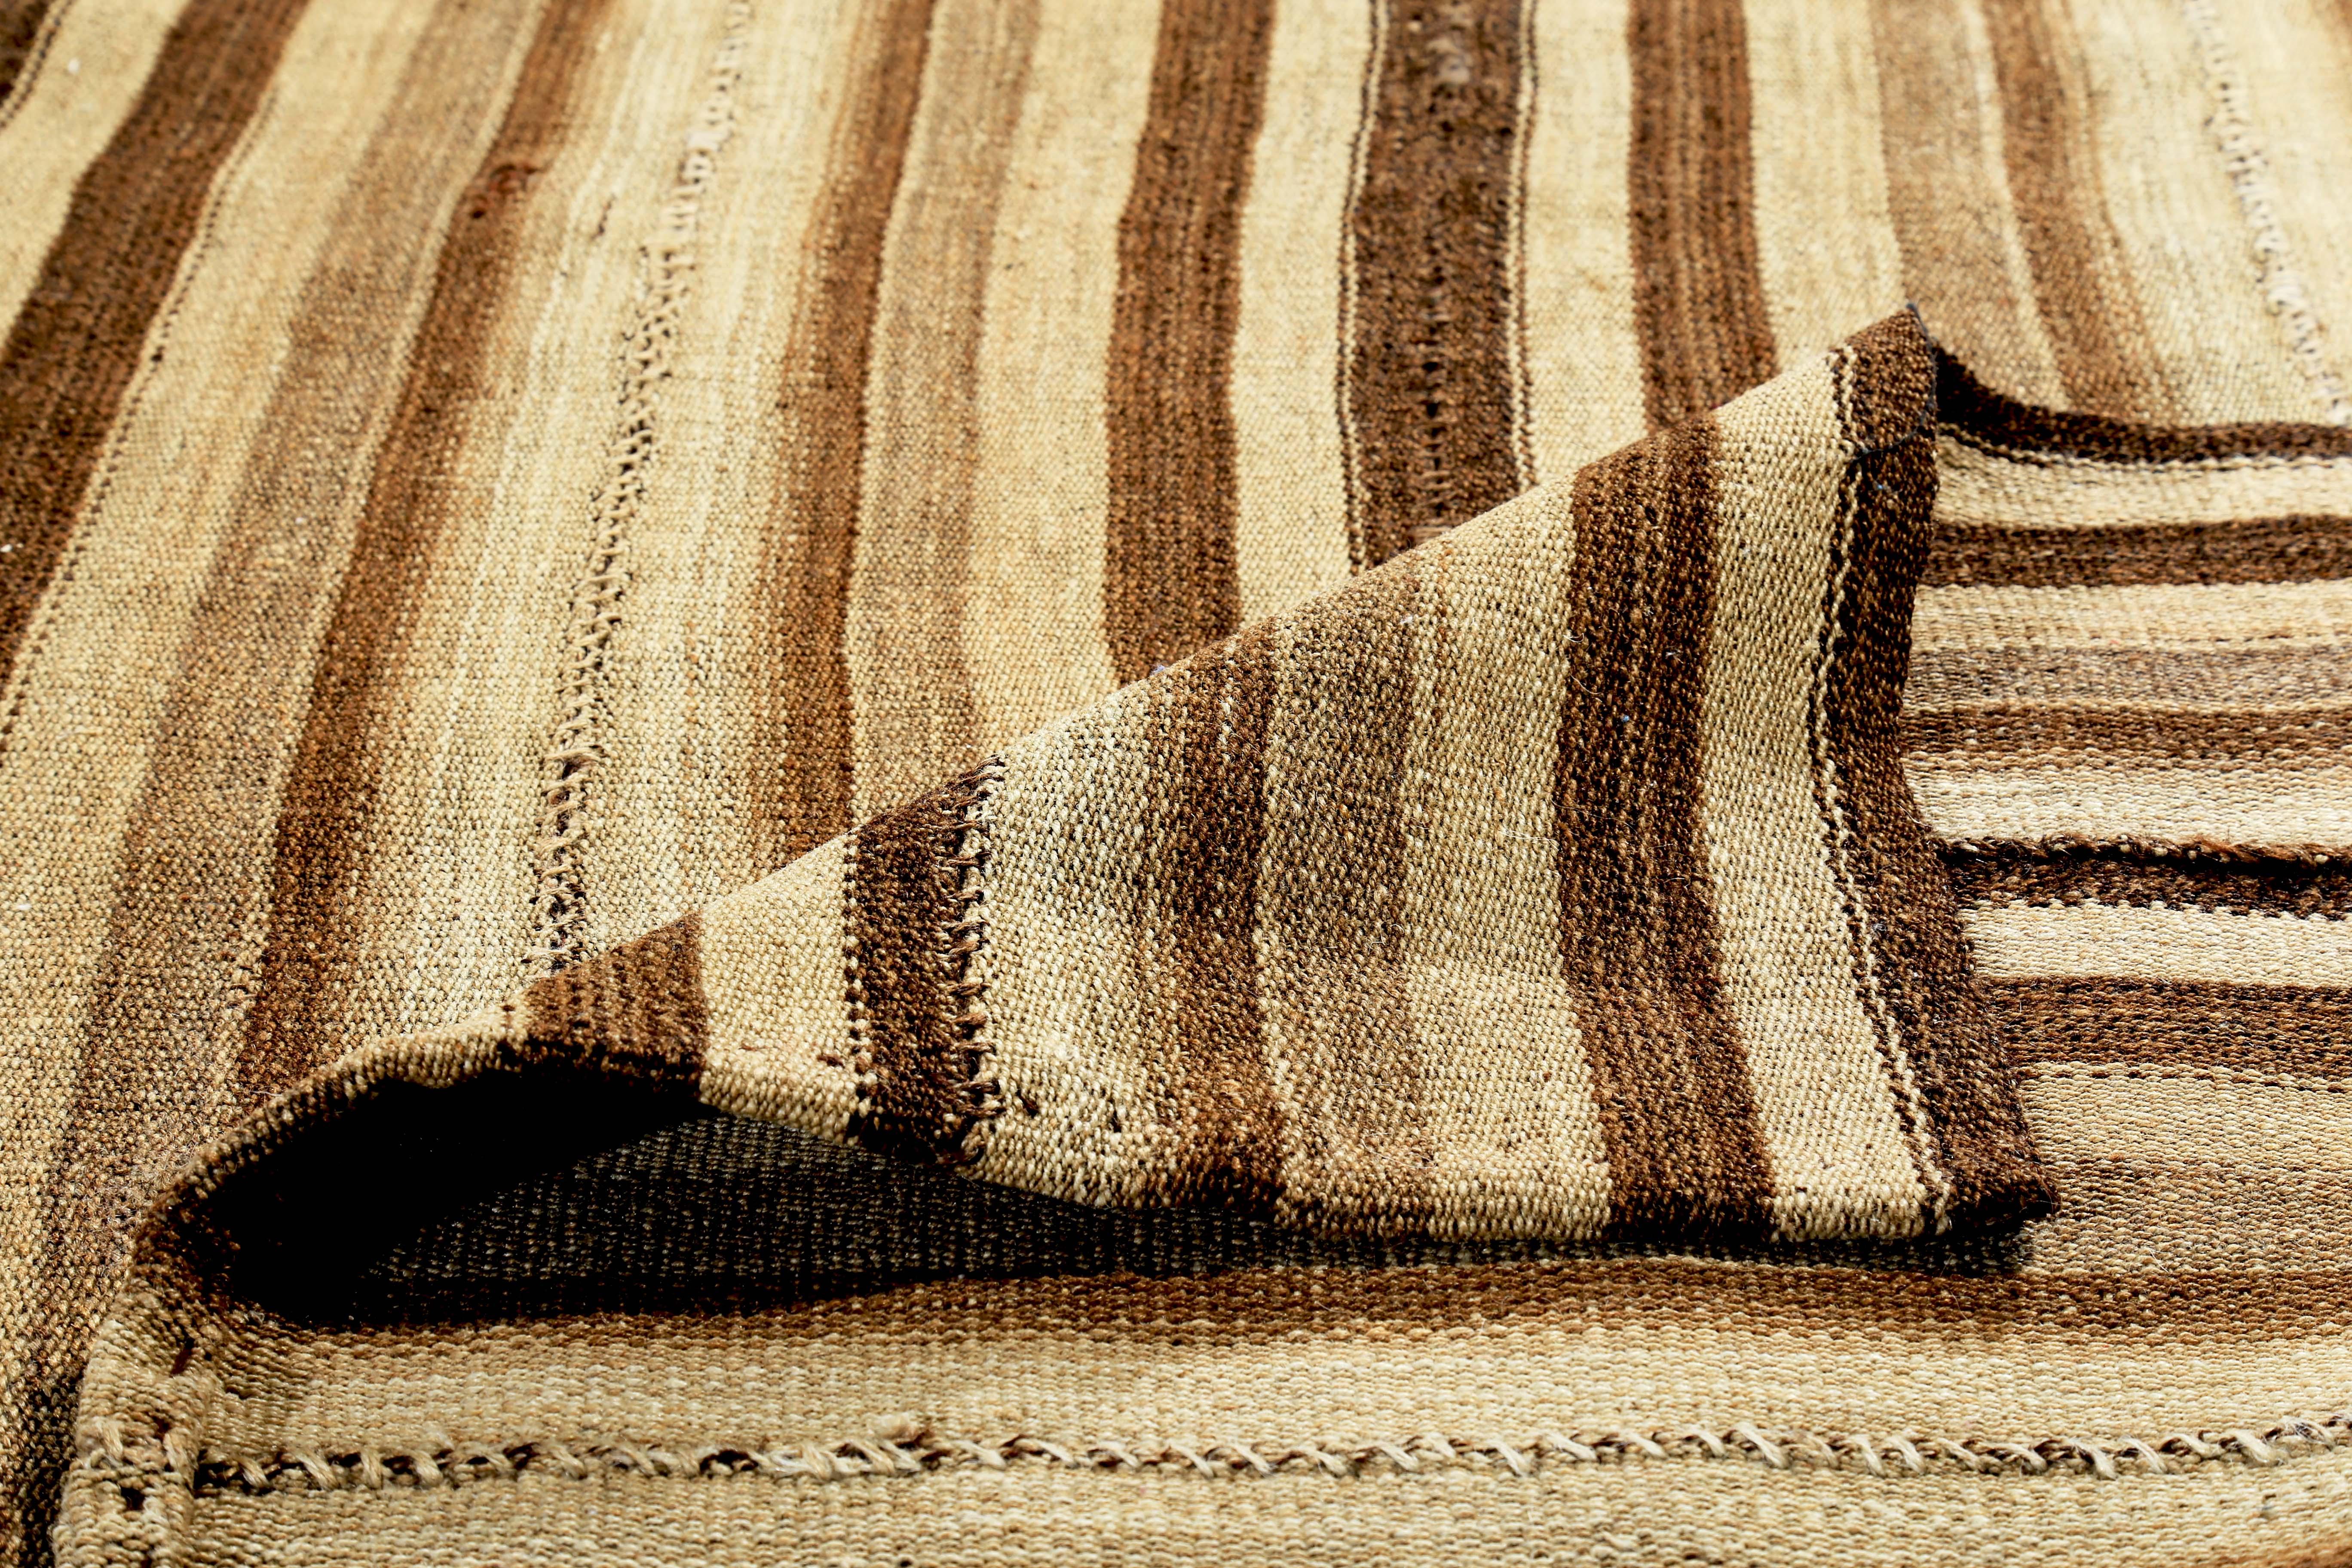 Contemporary Turkish Kilim Rug with Black and Brown Stripes on Beige Field In New Condition For Sale In Dallas, TX